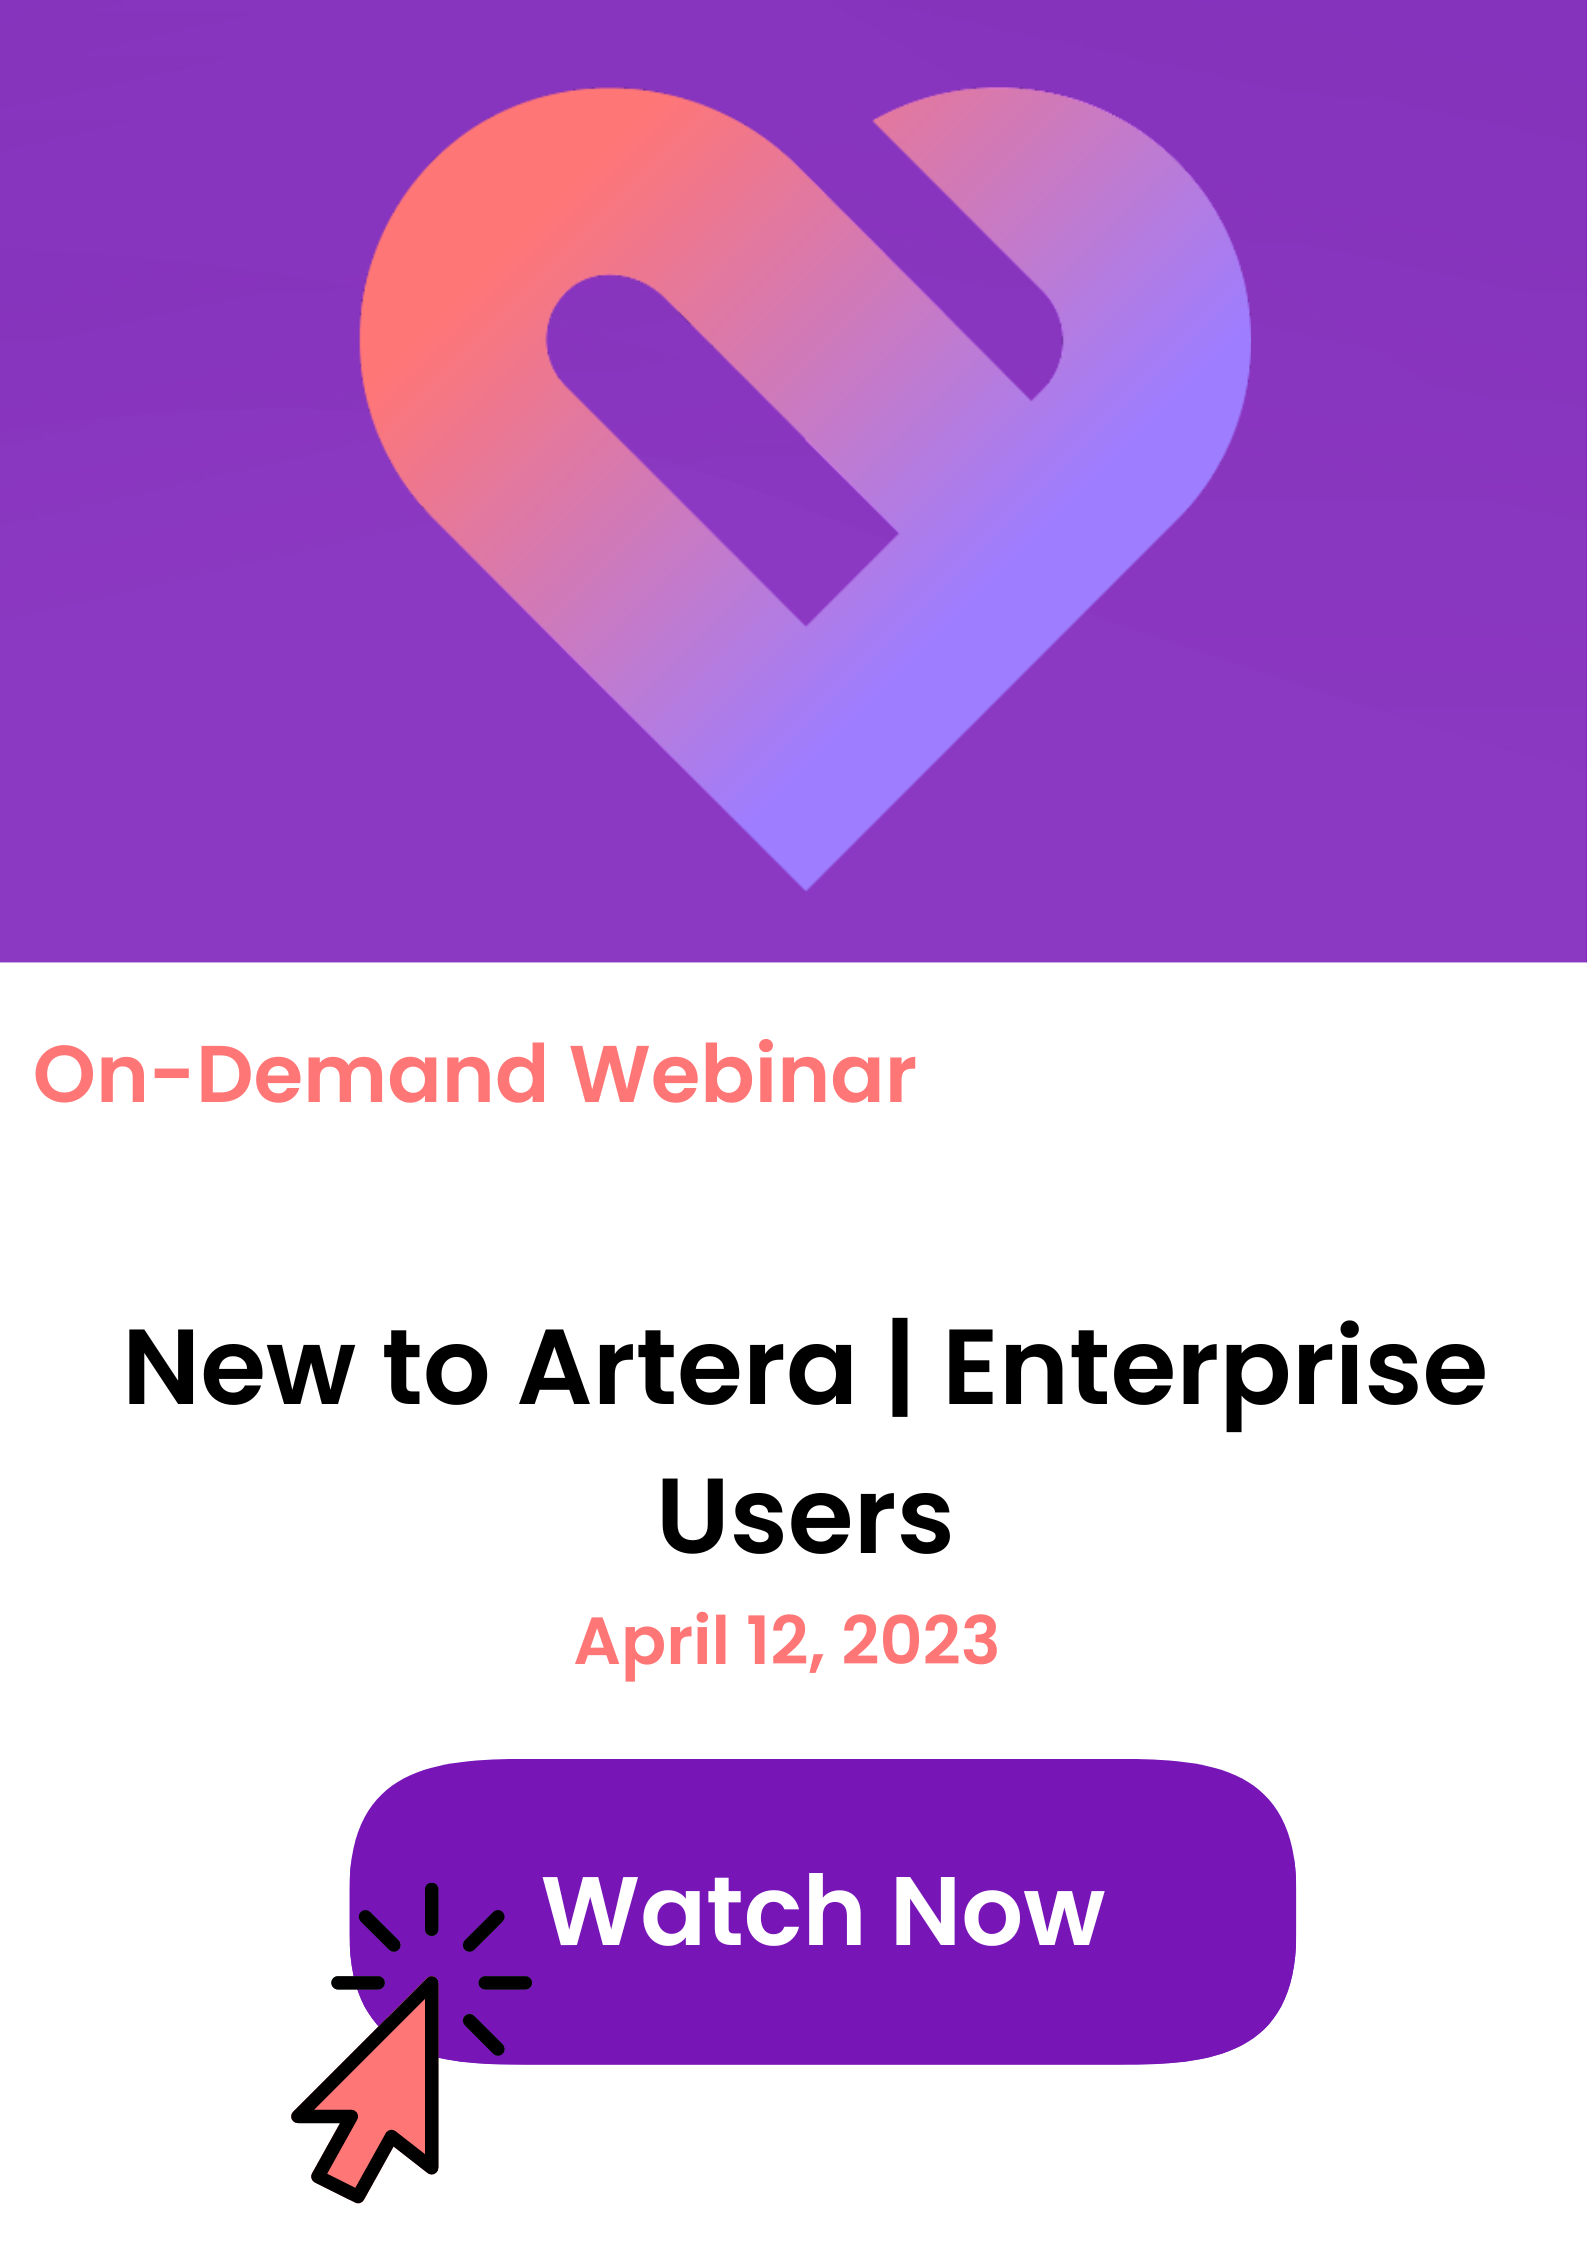 On-demand webinar tile for New to Artera Enterprise Users, click to watch now